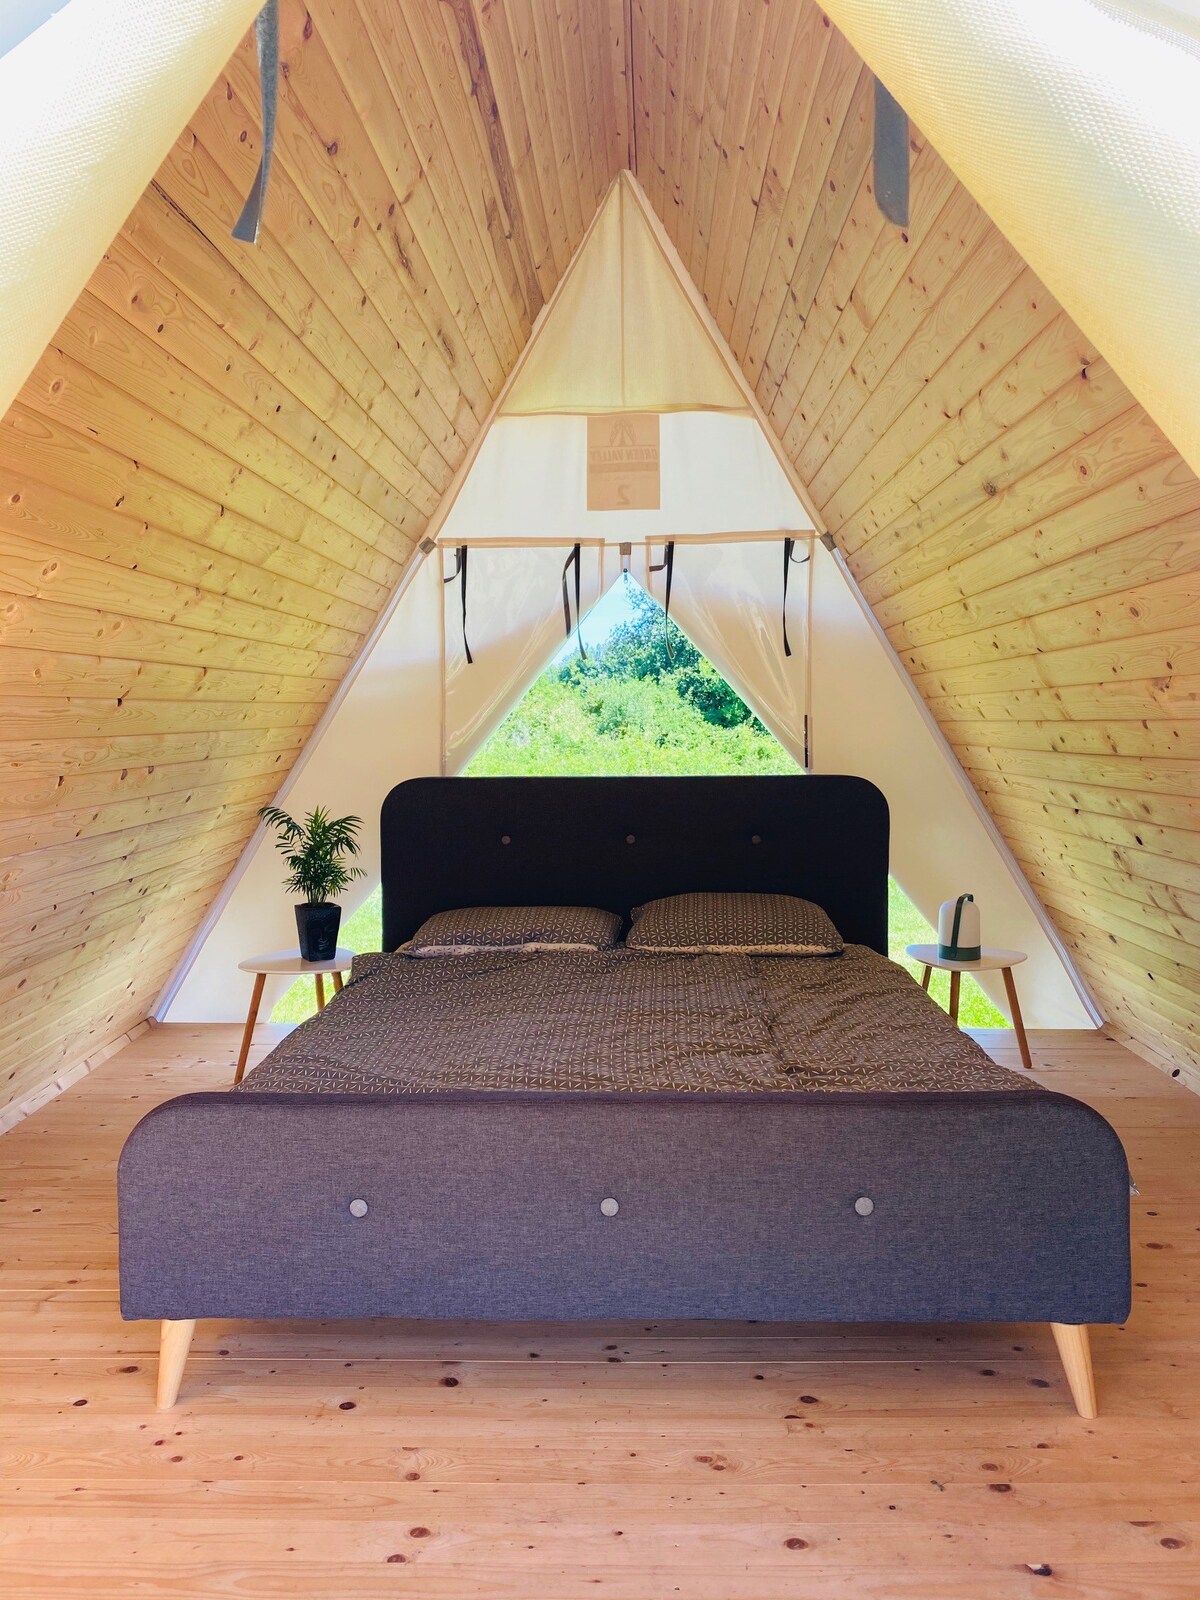 GREEN VALLEY GLAMPING - UNIQUE WOODEN COTTAGES